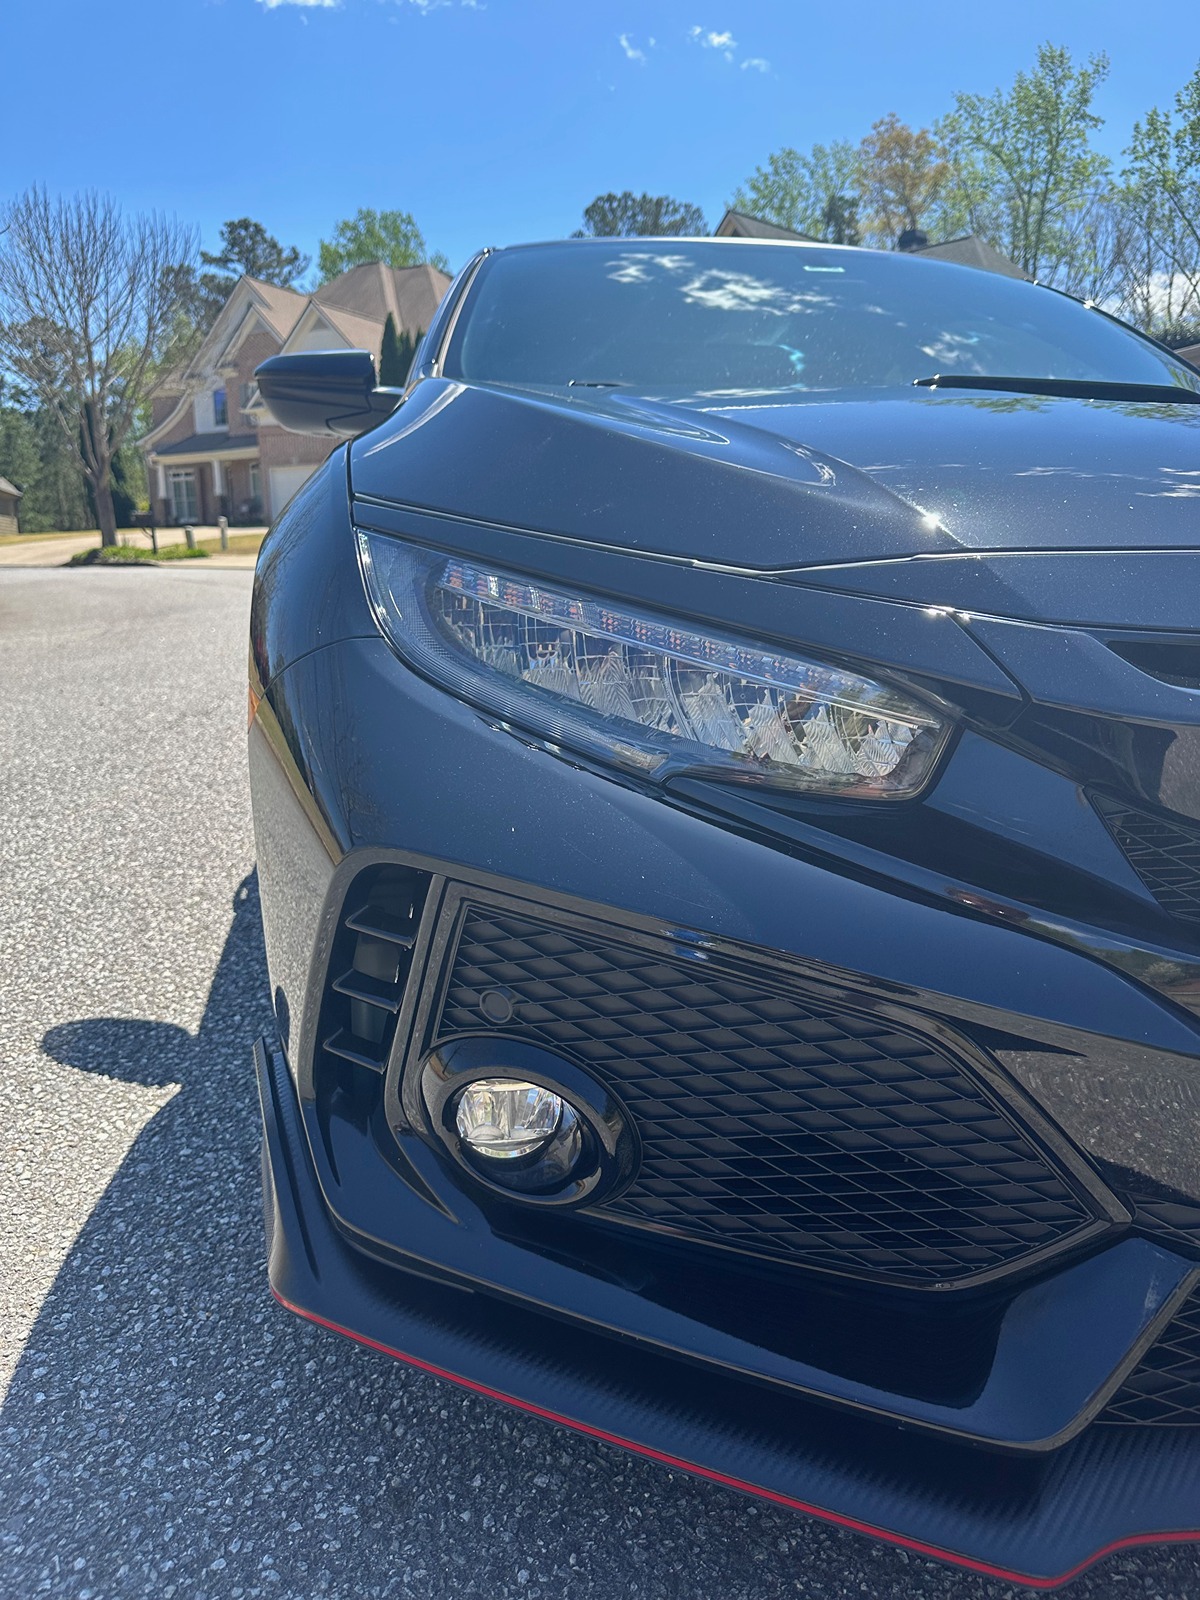 Honda Civic 10th gen Sold. 2019 Civic Type R for sale IMG_8125